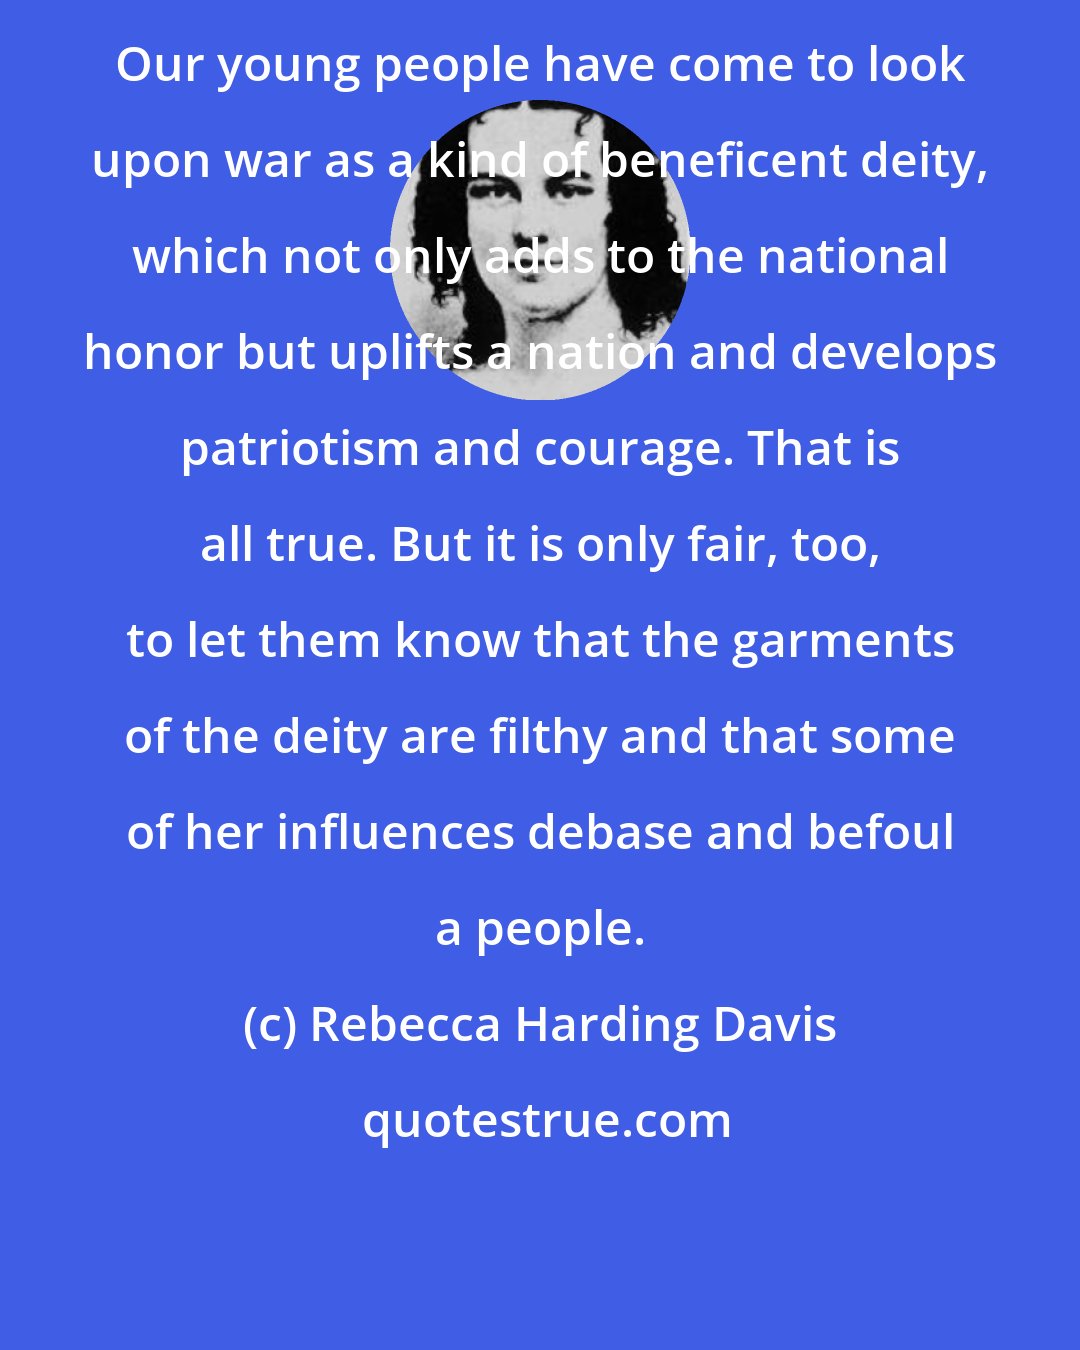 Rebecca Harding Davis: Our young people have come to look upon war as a kind of beneficent deity, which not only adds to the national honor but uplifts a nation and develops patriotism and courage. That is all true. But it is only fair, too, to let them know that the garments of the deity are filthy and that some of her influences debase and befoul a people.